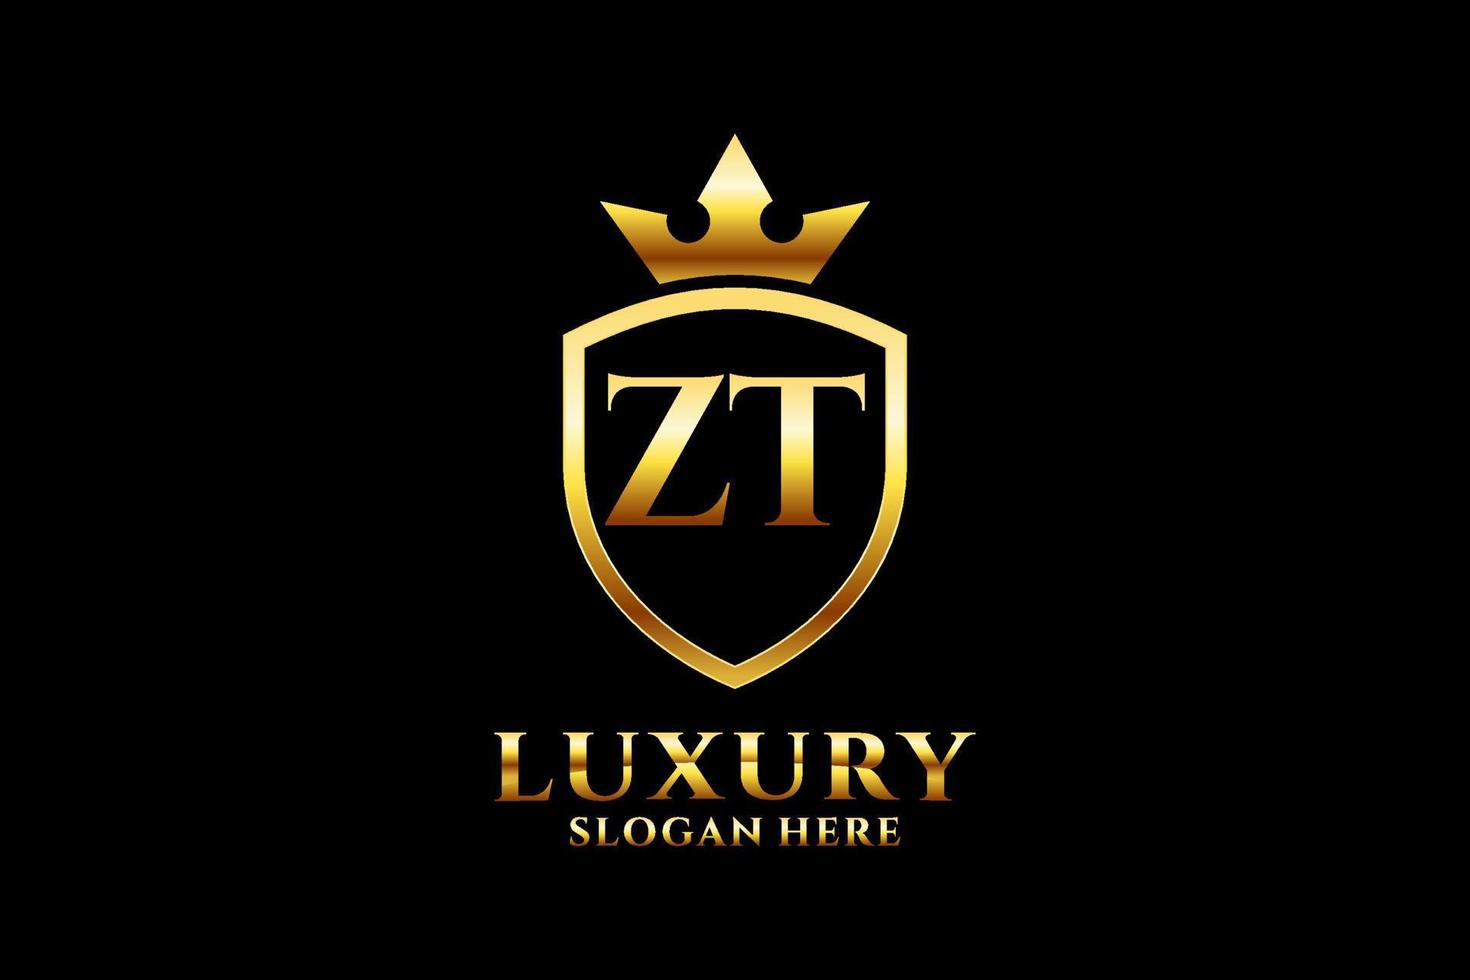 initial ZT elegant luxury monogram logo or badge template with scrolls and royal crown - perfect for luxurious branding projects vector